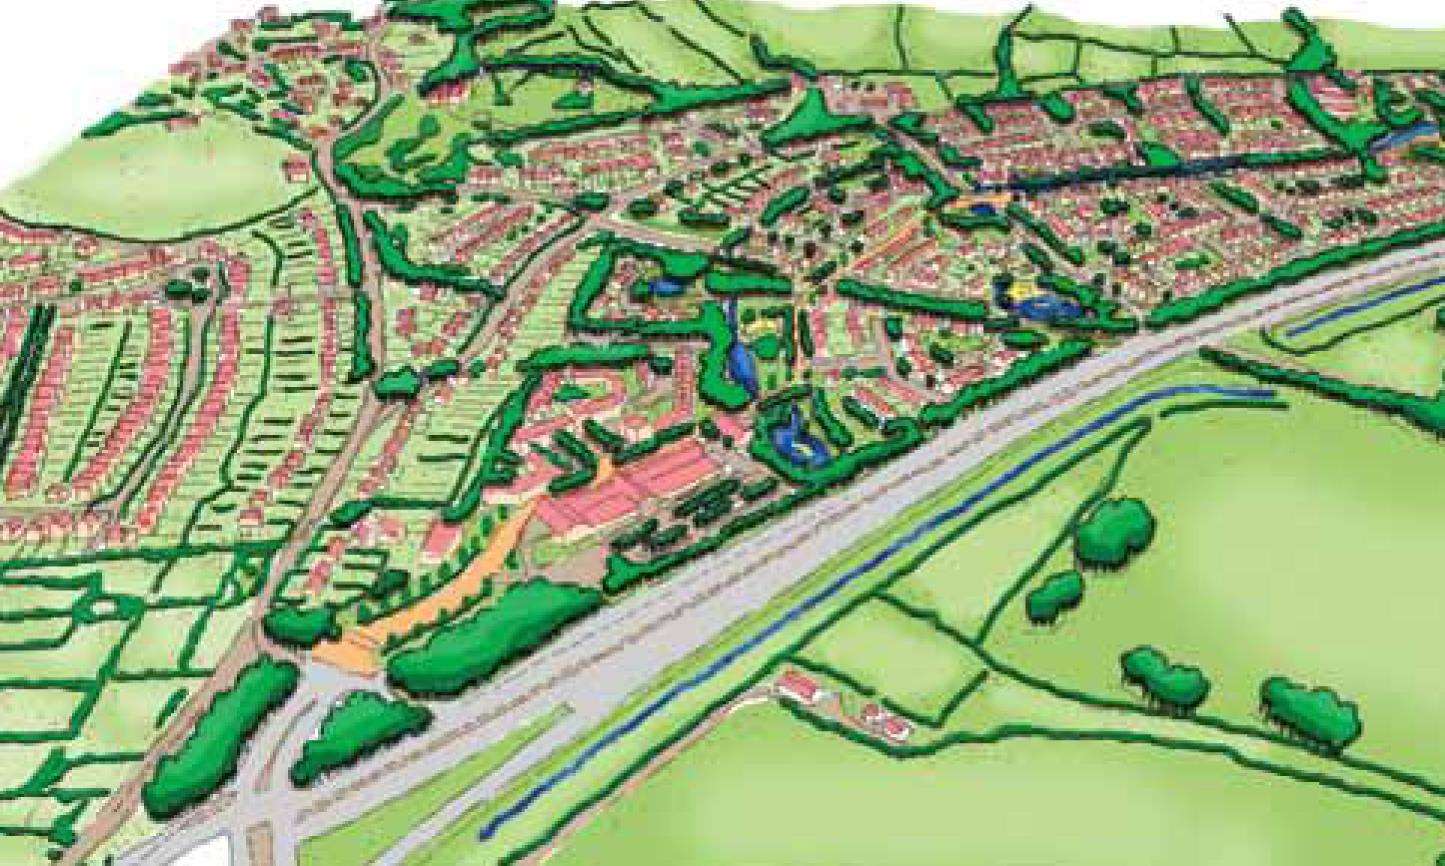 The plan for 800 homes at Strode Farm